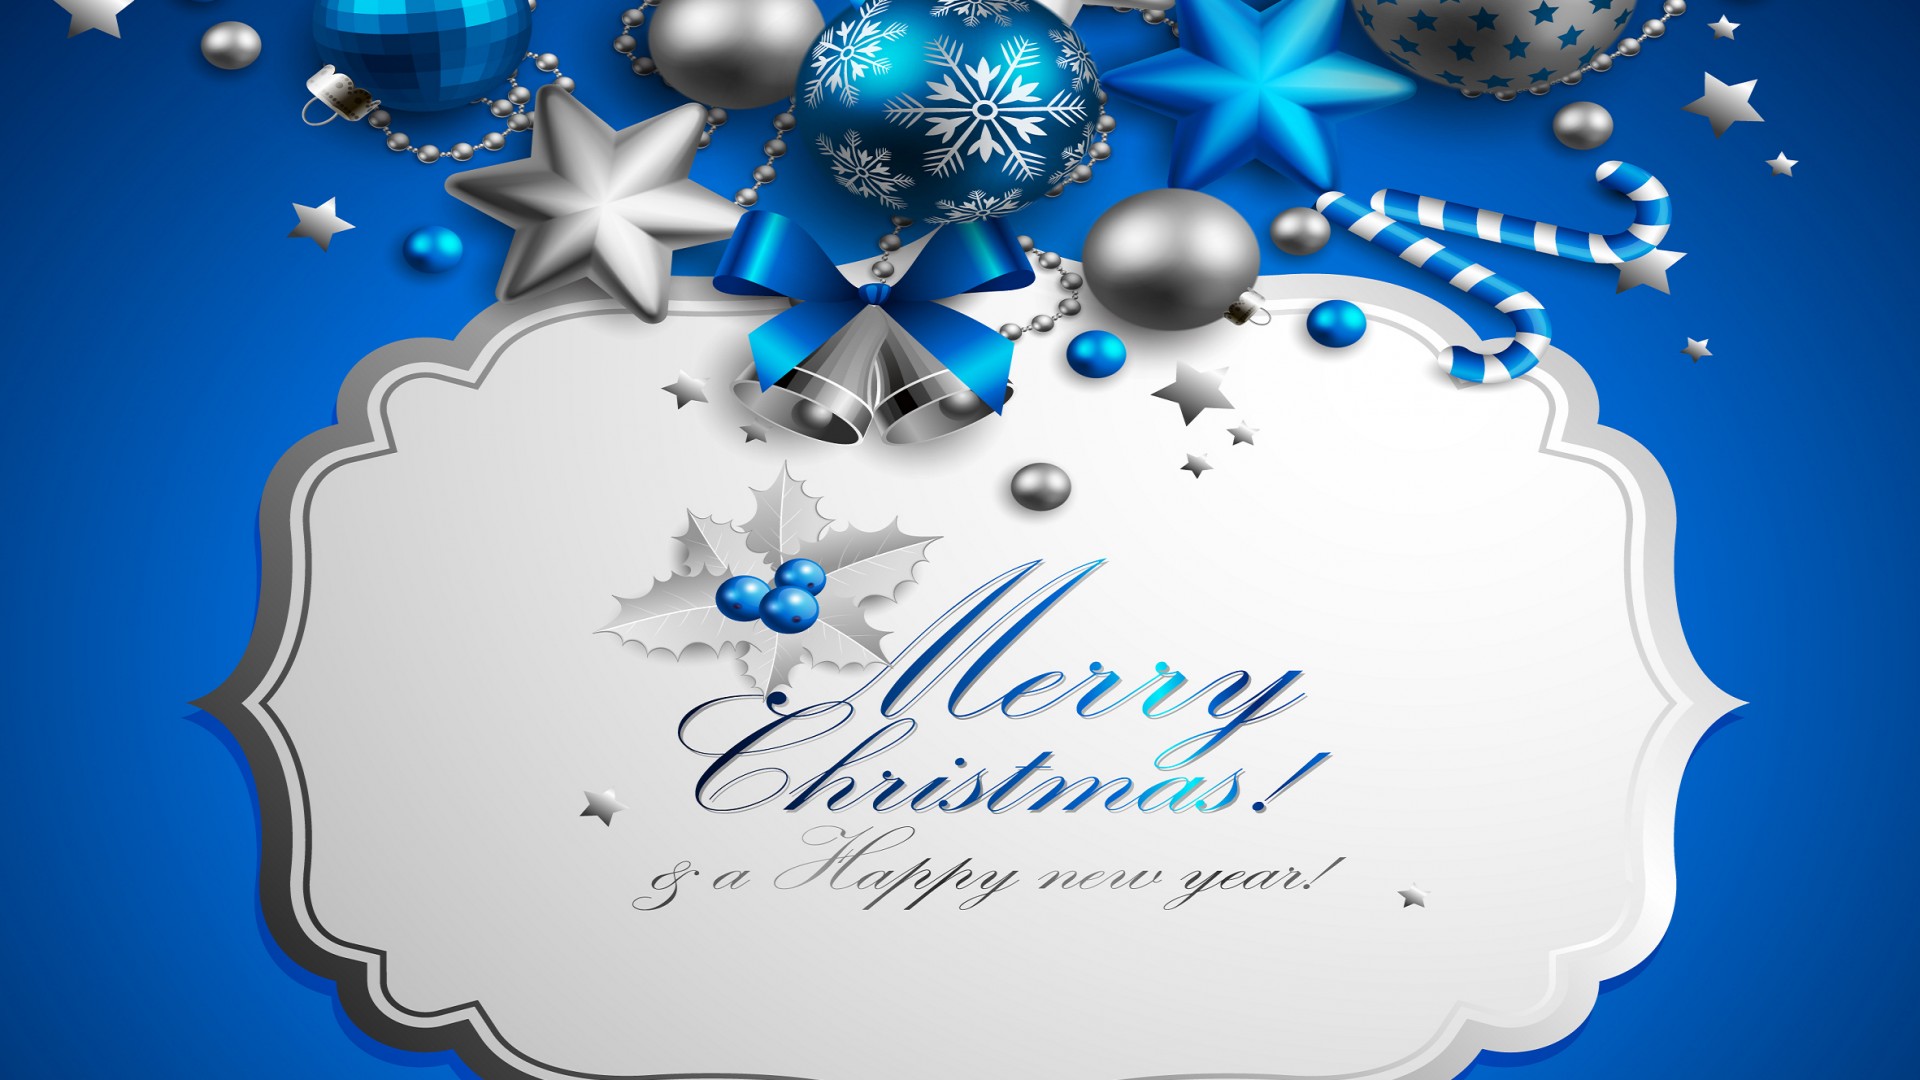 merry christmas wallpapers free hd